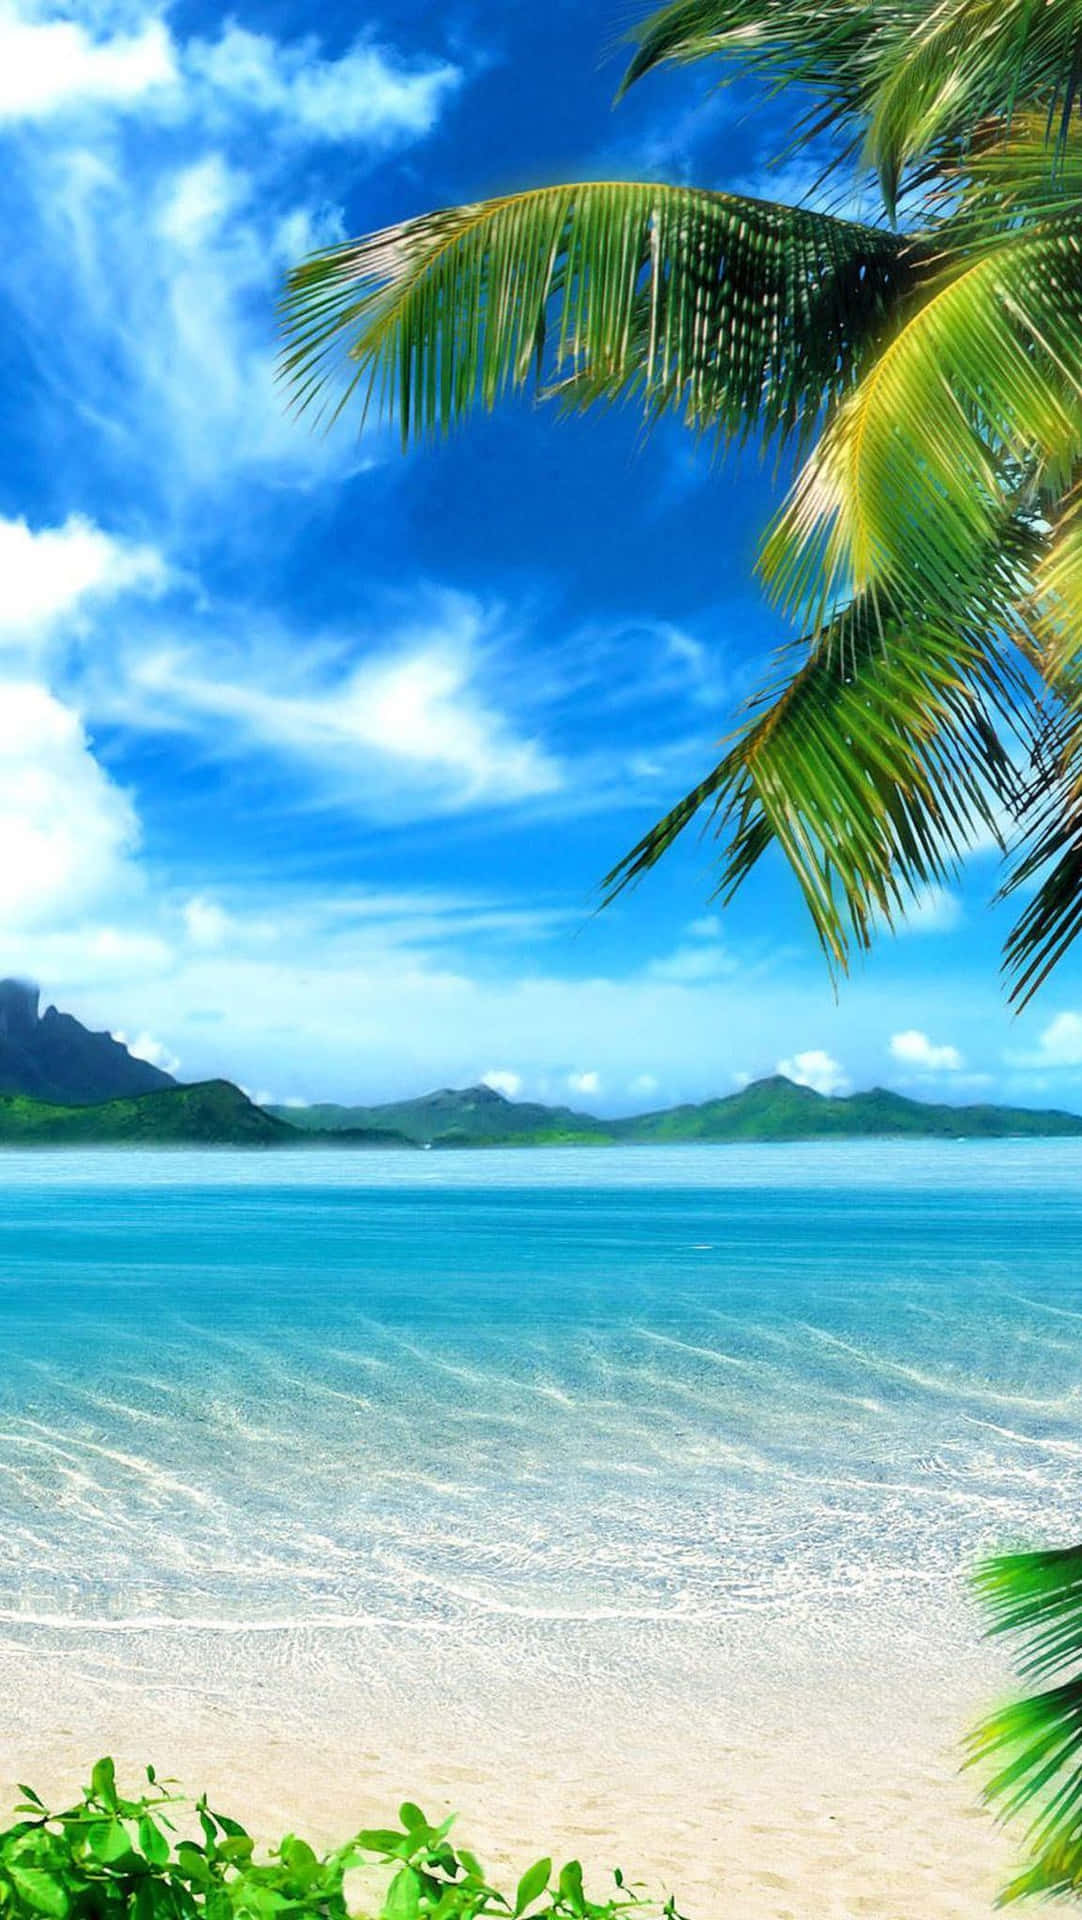 A Beach With Palm Trees And Water Wallpaper